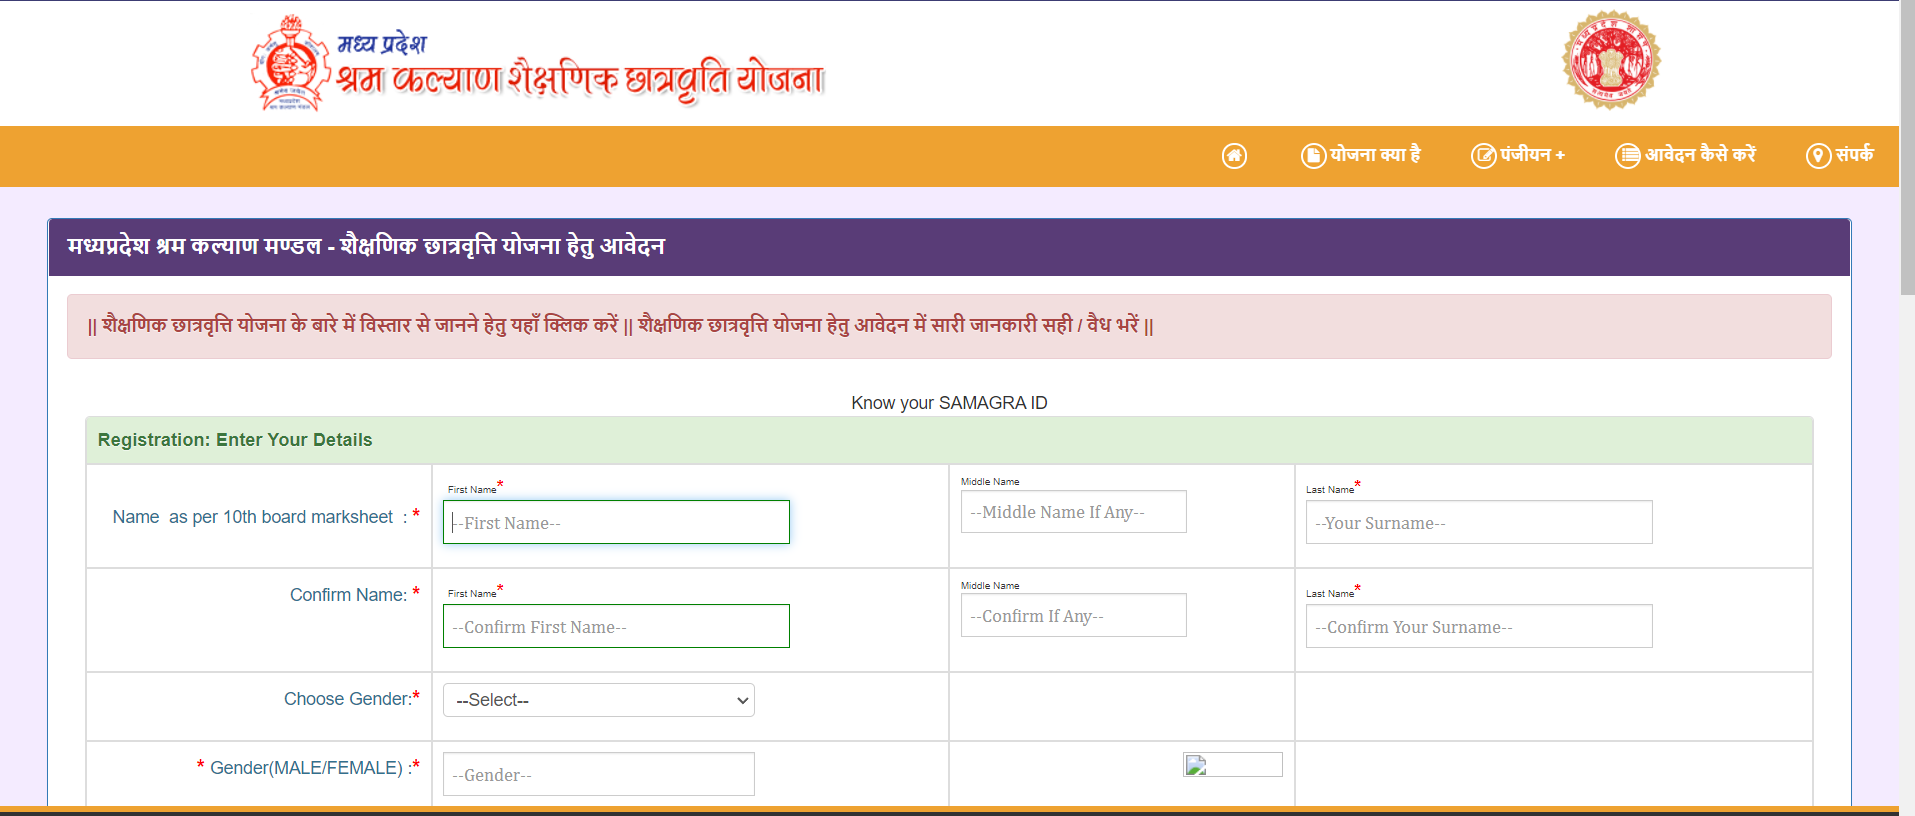 MP SHRM KLYAAN AAVEDN FORM